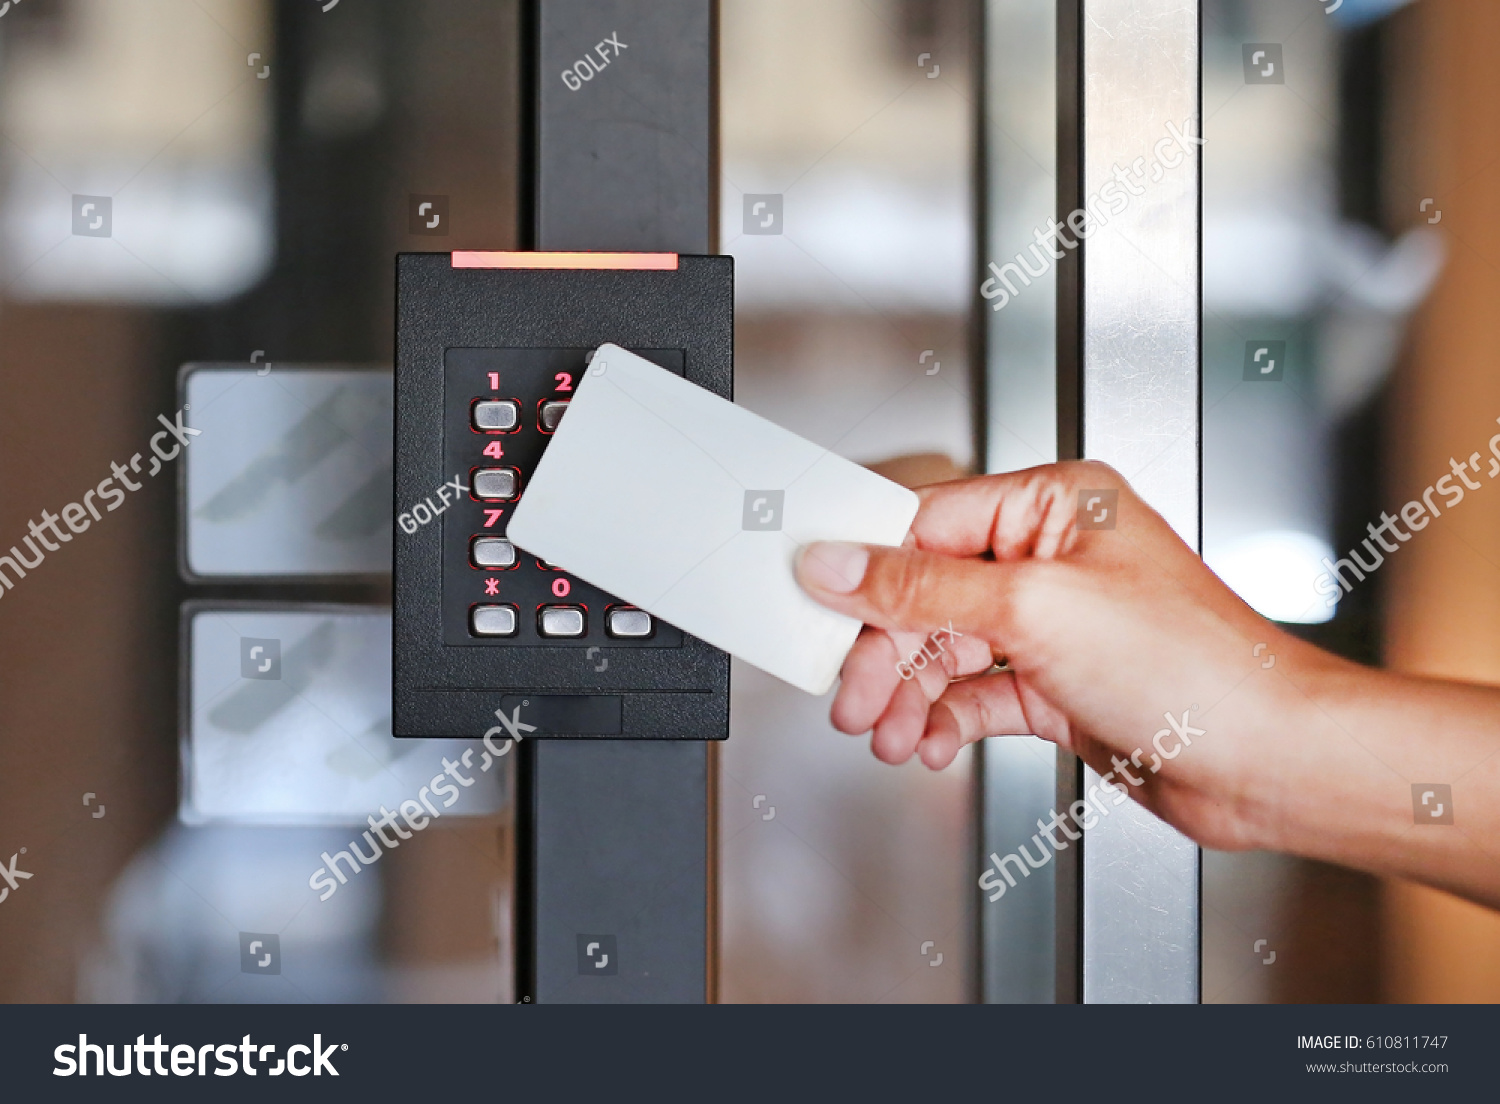 Door access control - young woman holding a key card to lock and unlock door. #610811747